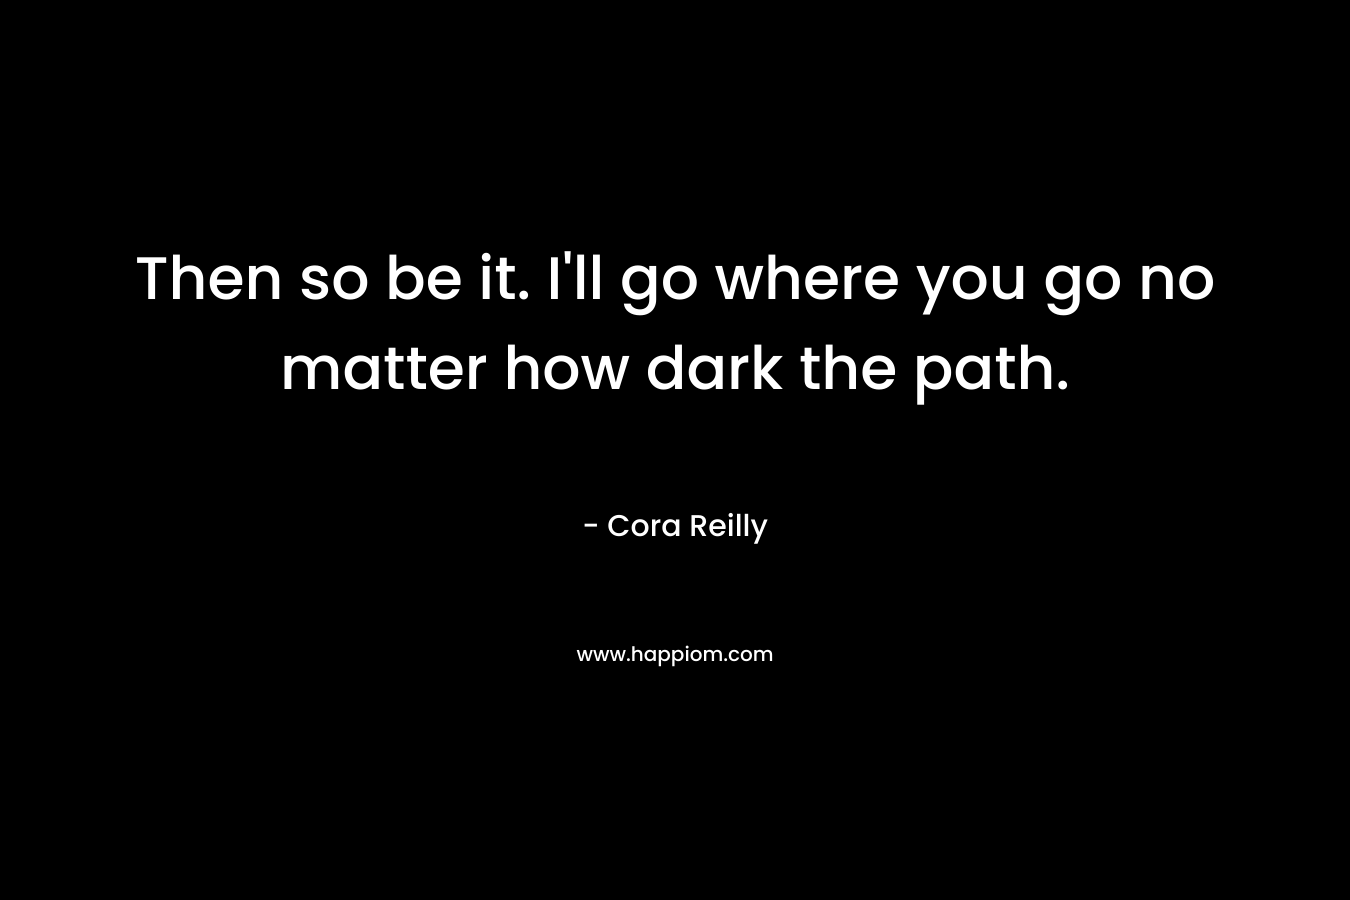 Then so be it. I'll go where you go no matter how dark the path.